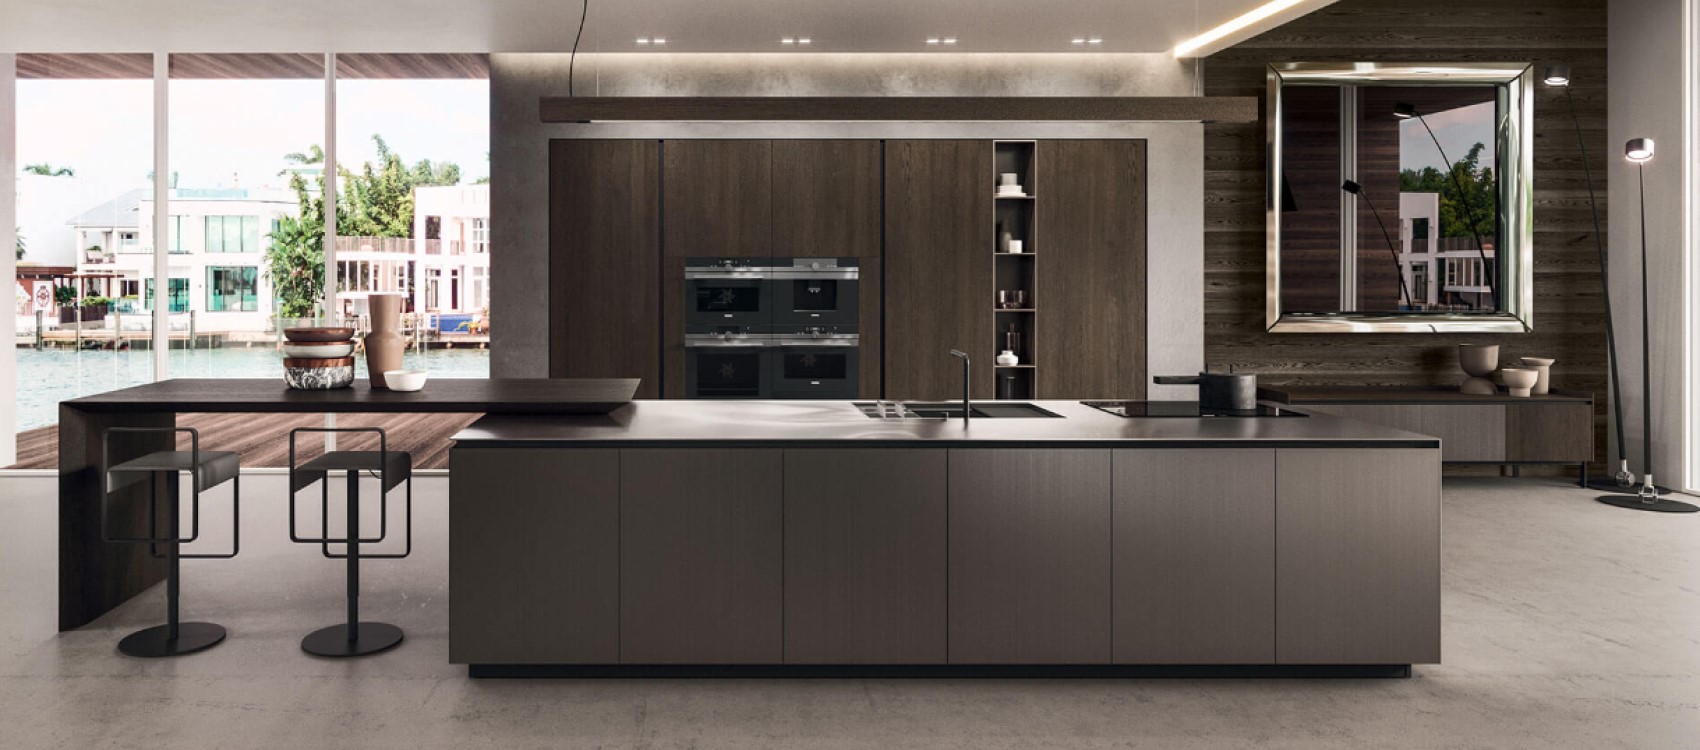 Arrital kitchen in metal brown lacquer and cacao wood with tall units and island with breakfast bar